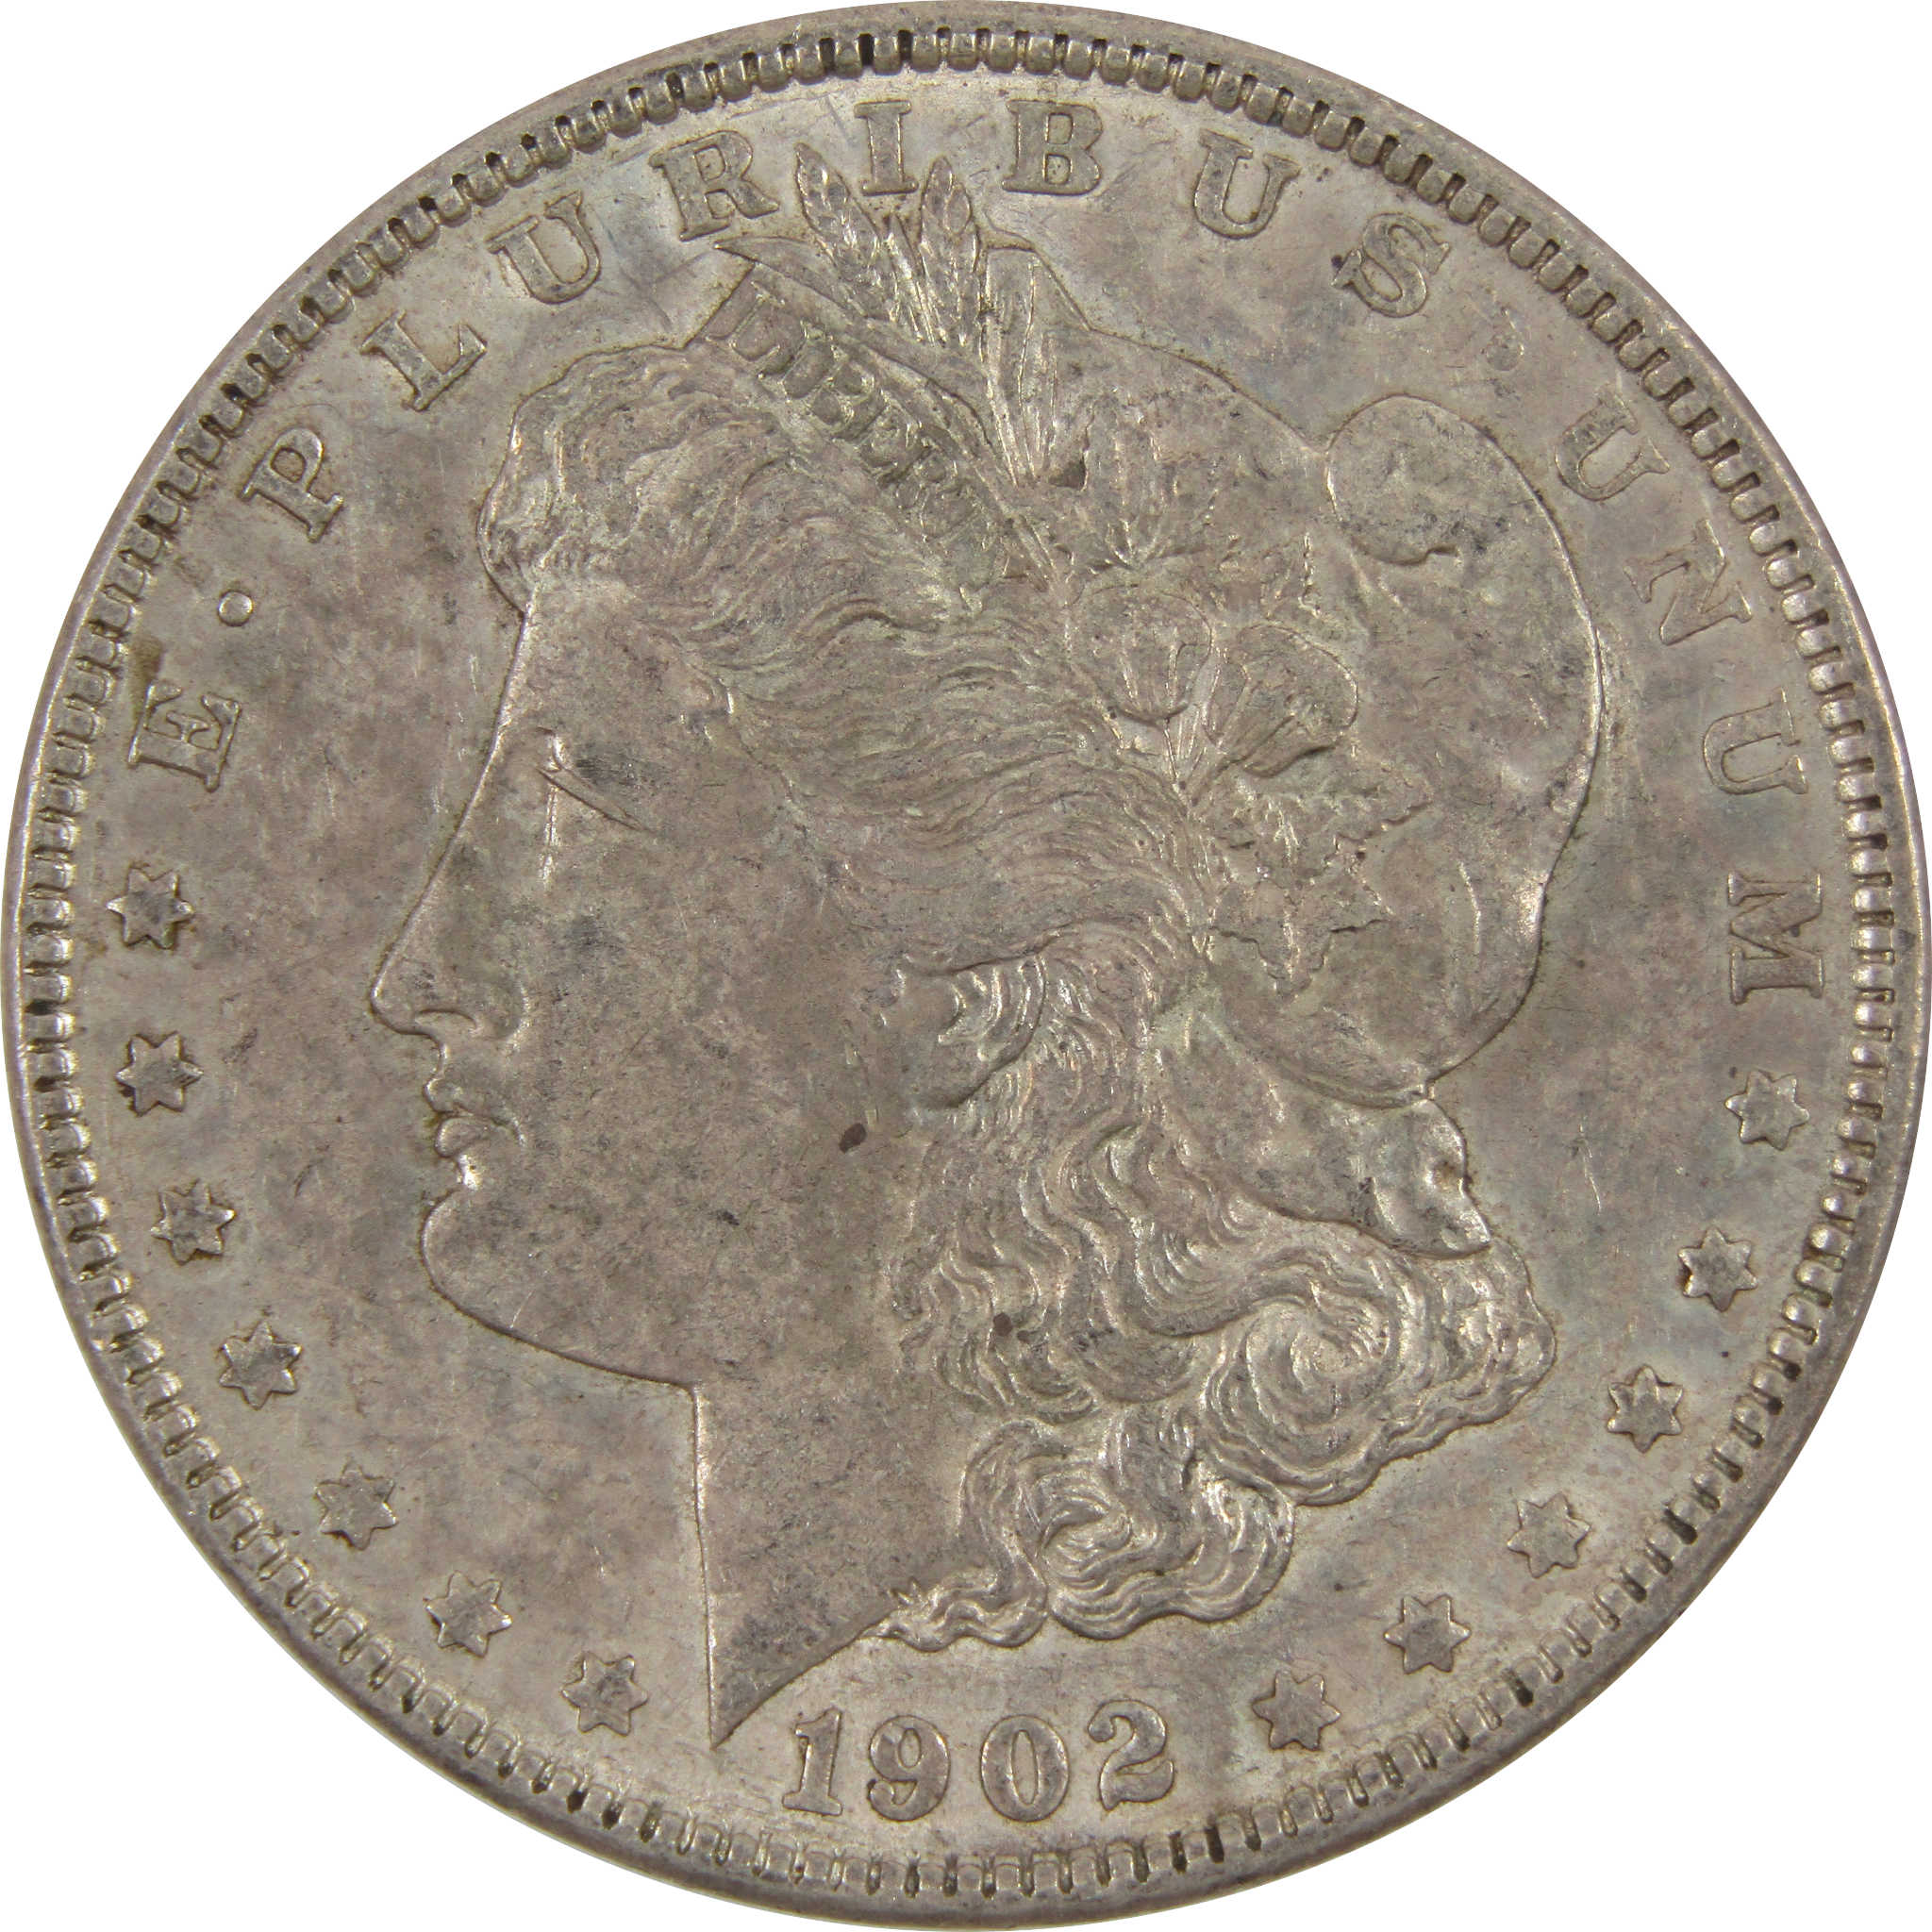 1902 Morgan Dollar AU About Uncirculated 90% Silver $1 Coin SKU:I7567 - Morgan coin - Morgan silver dollar - Morgan silver dollar for sale - Profile Coins &amp; Collectibles